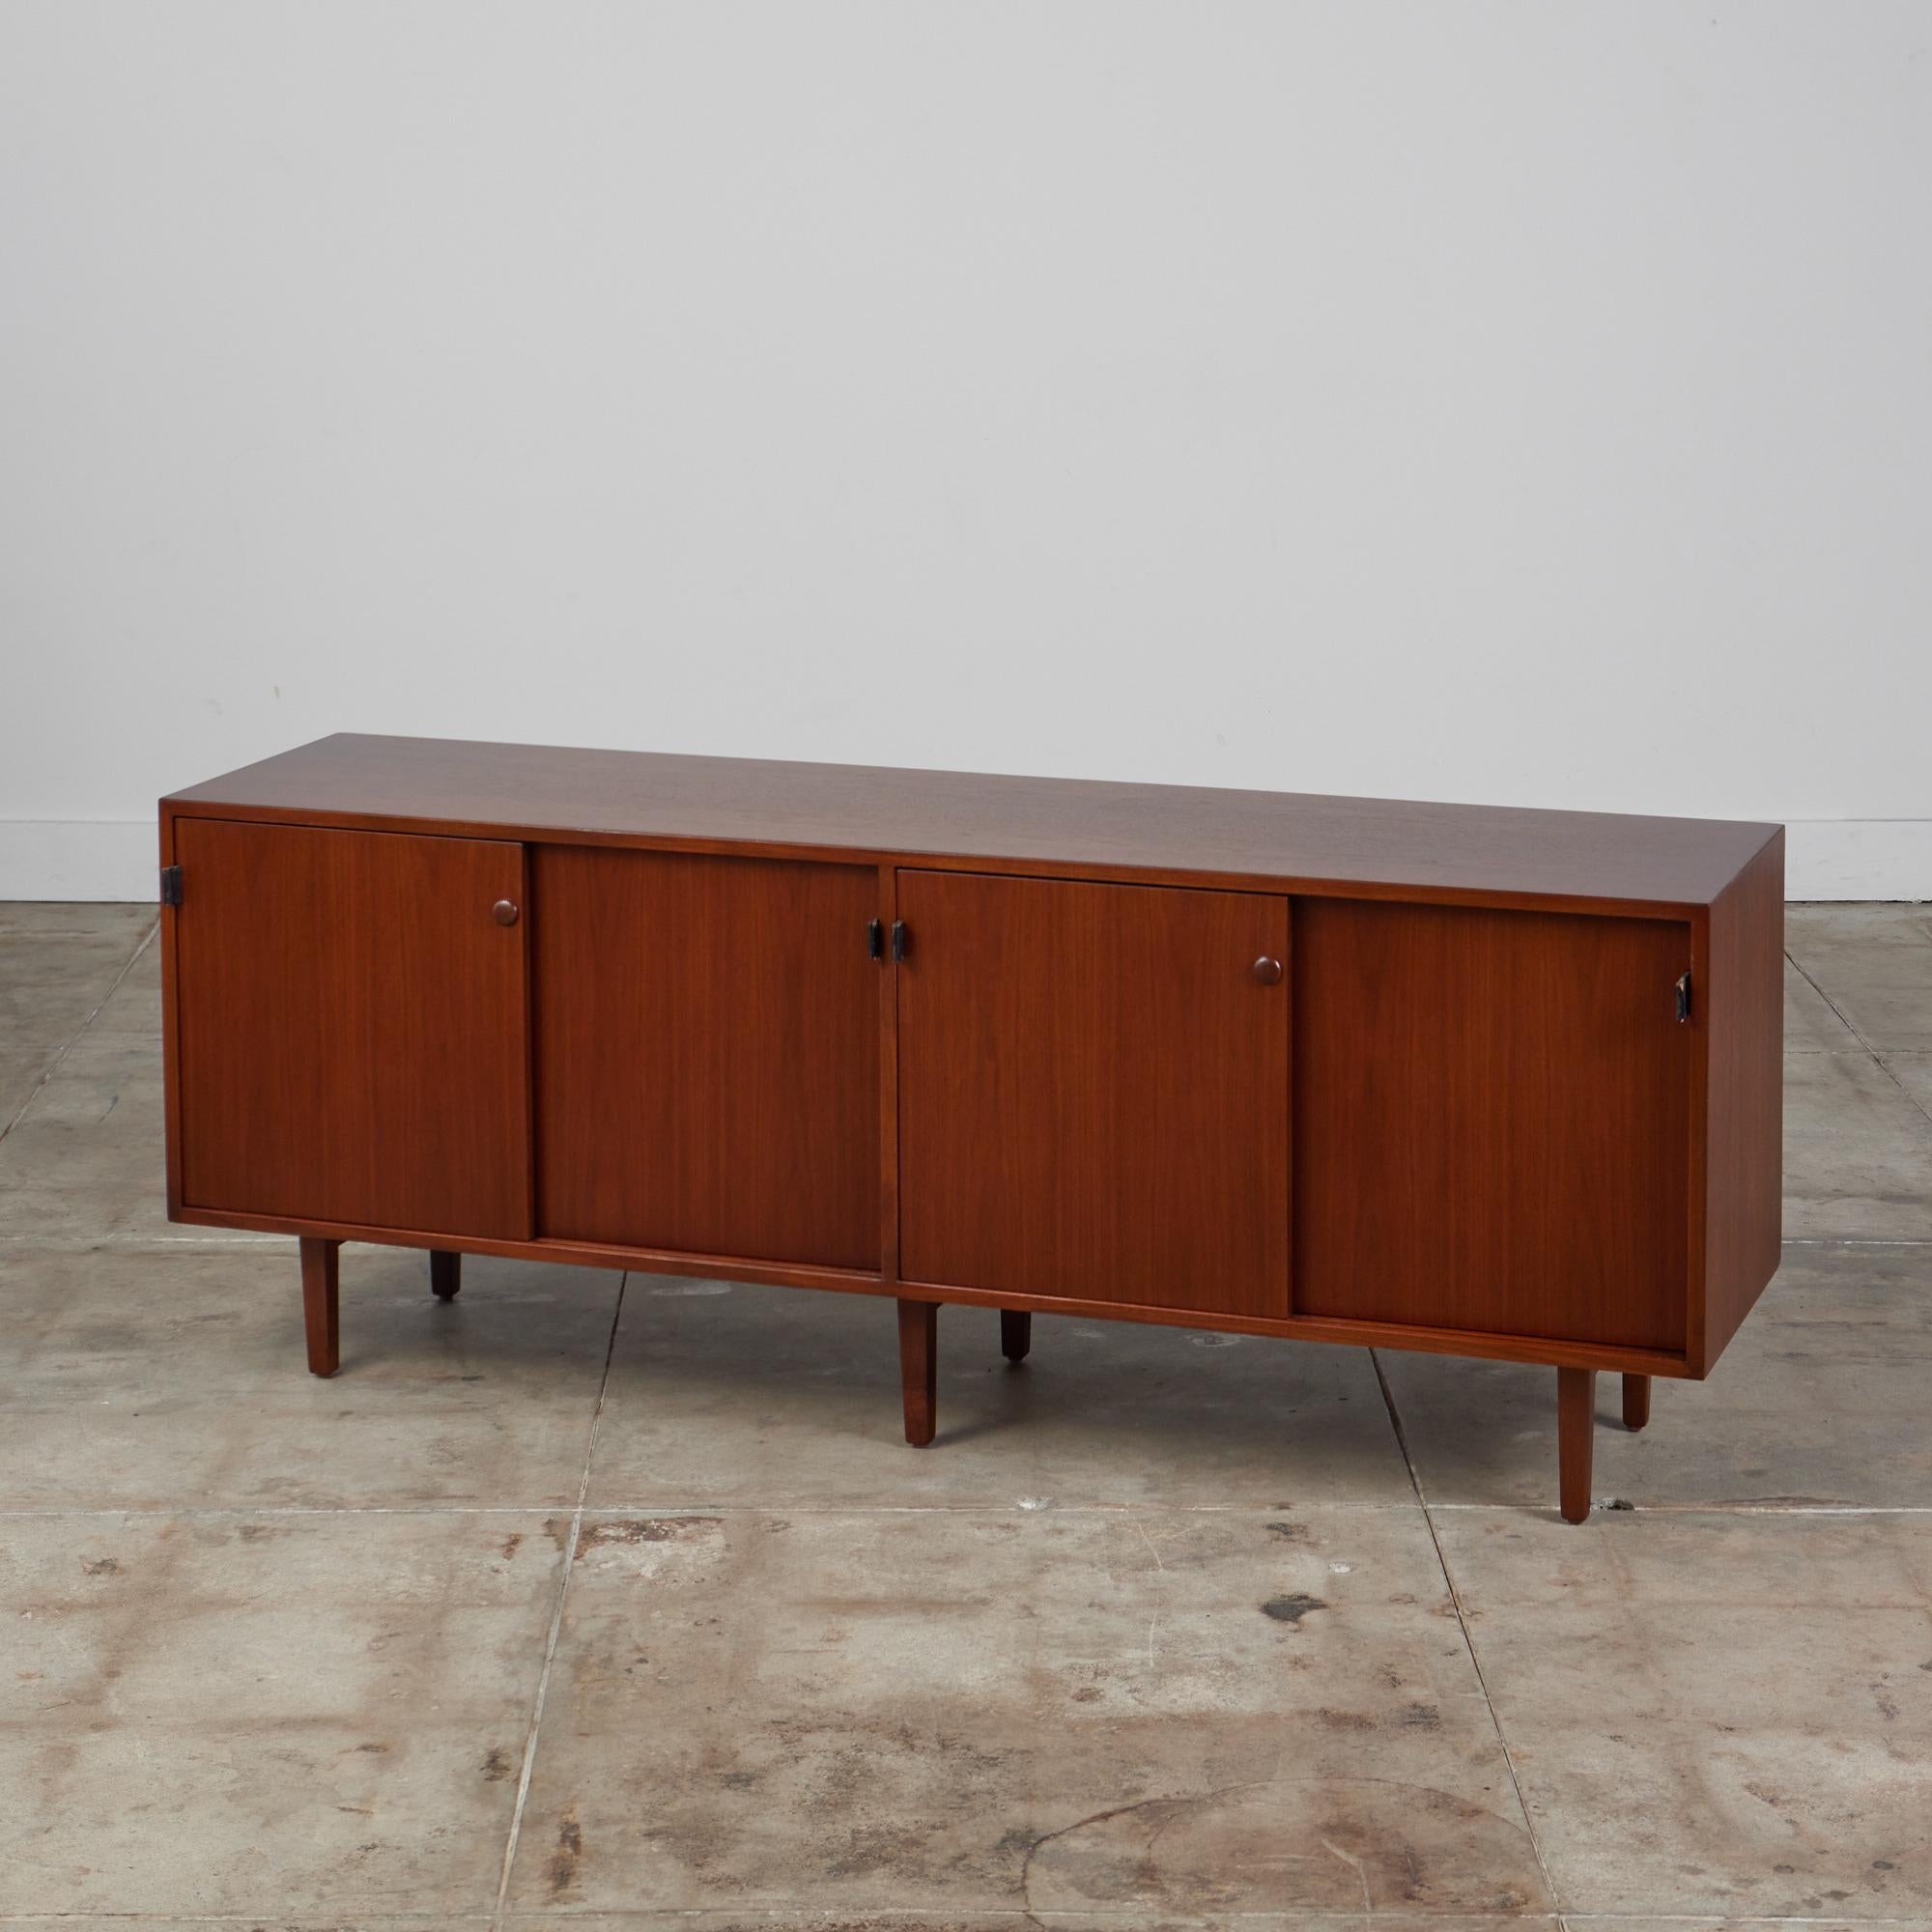 Four compartment early walnut credenza by Florence Knoll, USA, c.1950s. Three compartments features an oak interior with adjustable oak shelf and closes with sliding doors. A single compartment has a pull out drawer, perfect for filing or a record